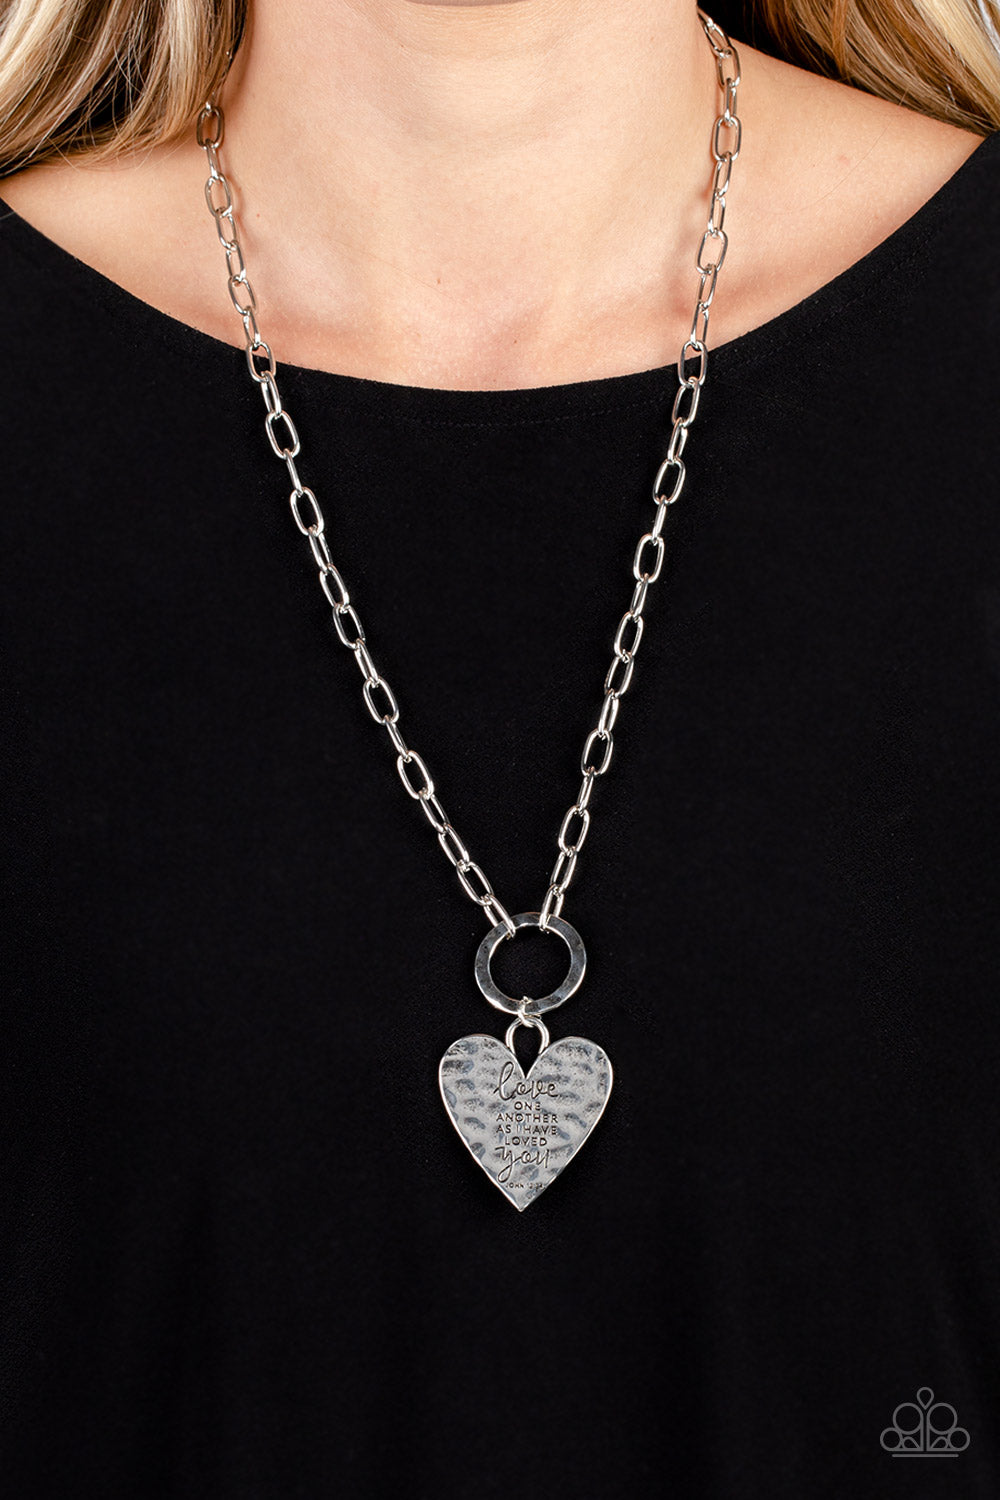 Brotherly Love - Silver Paparazzi Necklace